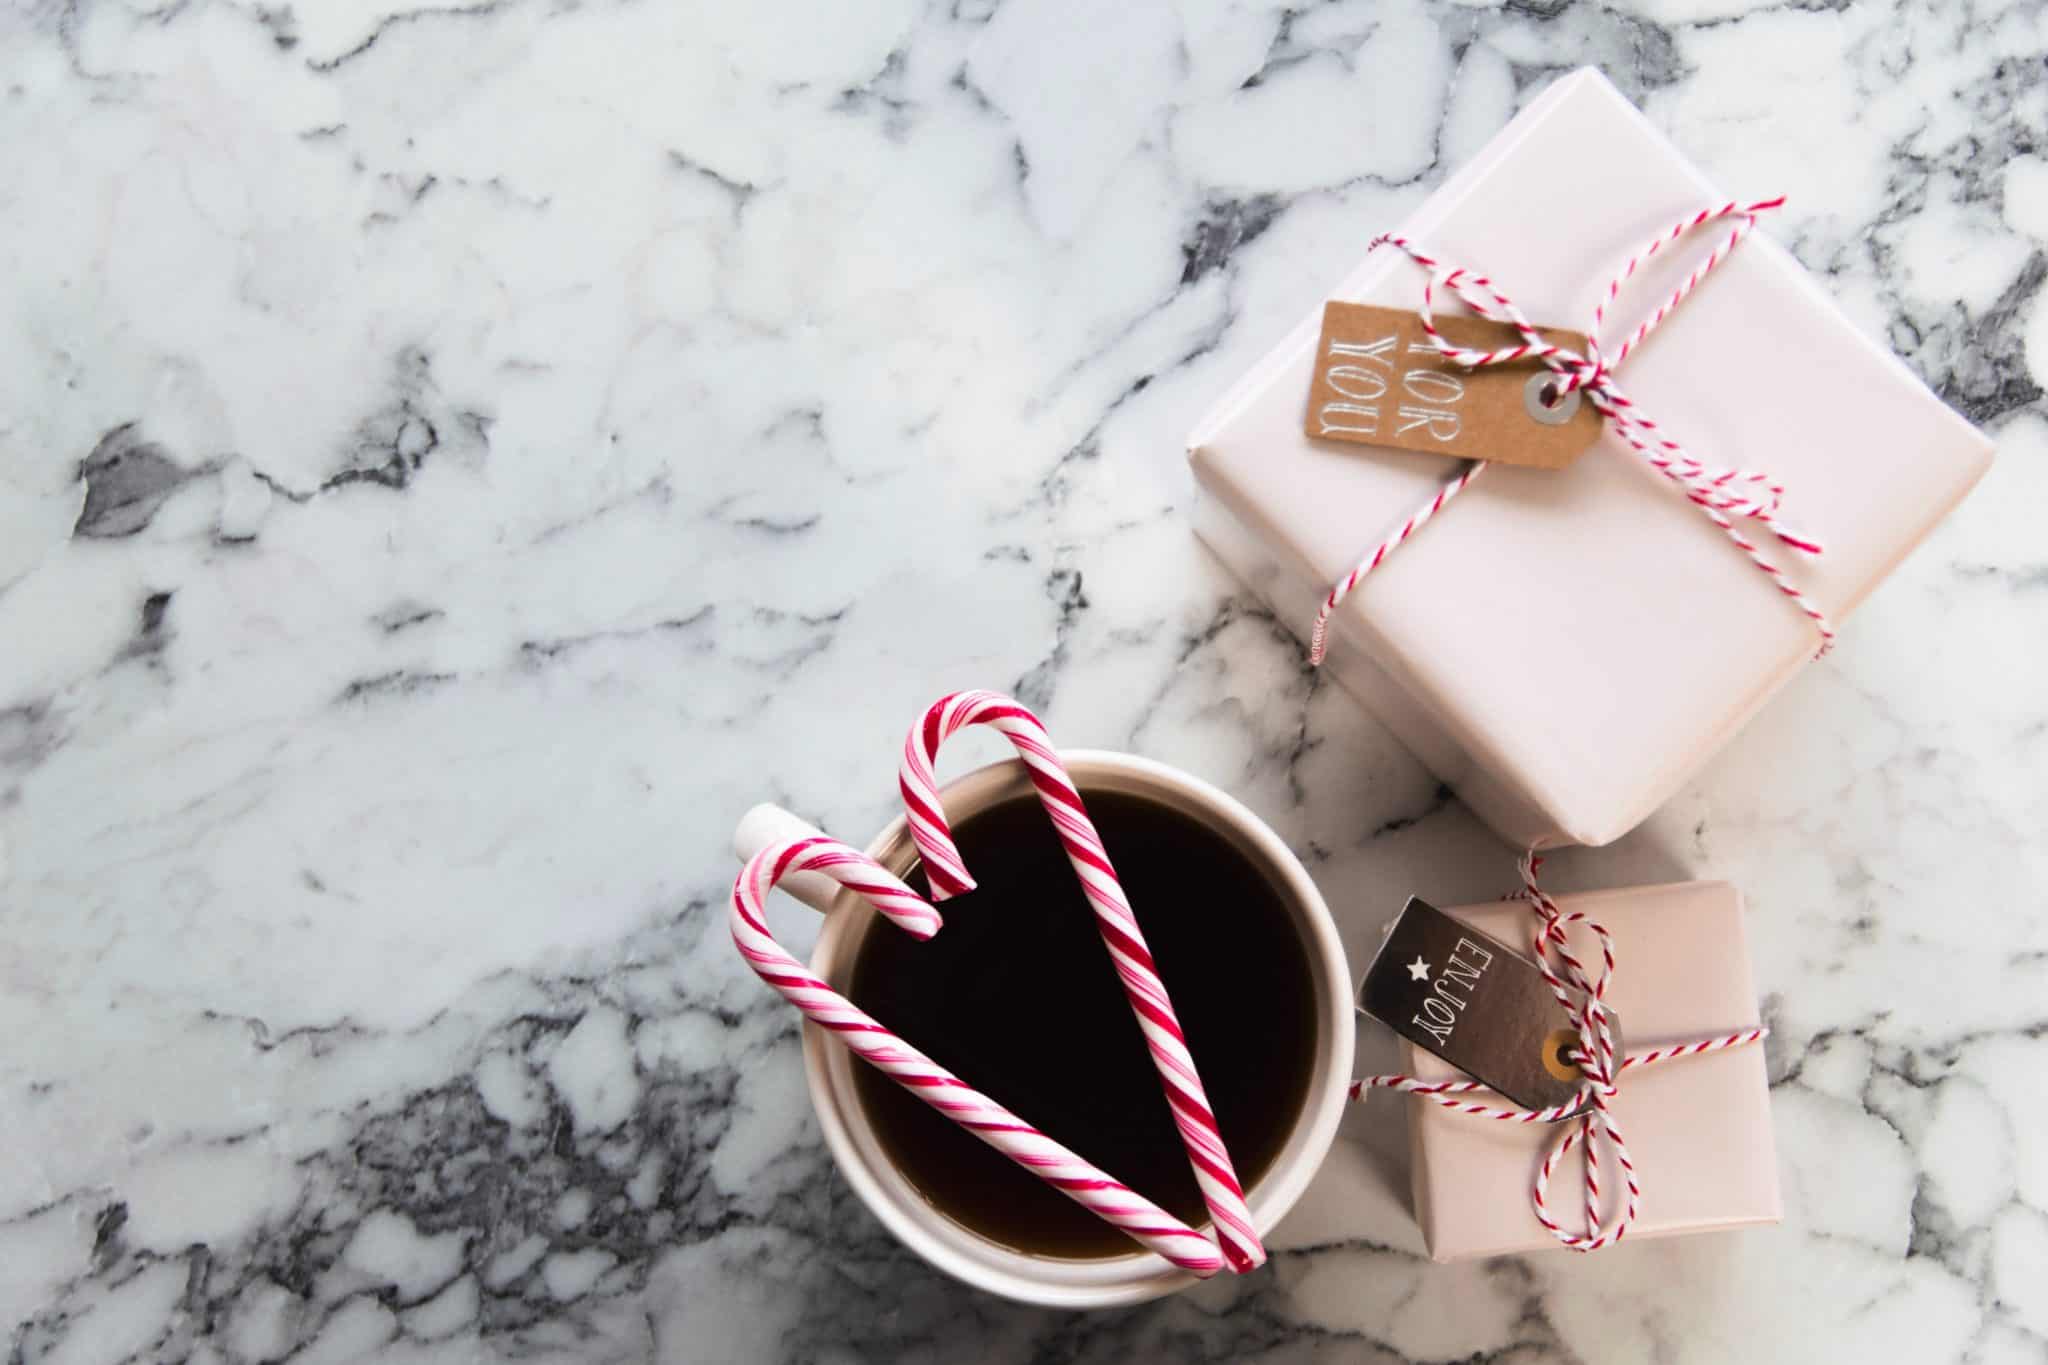 coffee, candycanes and gifts!